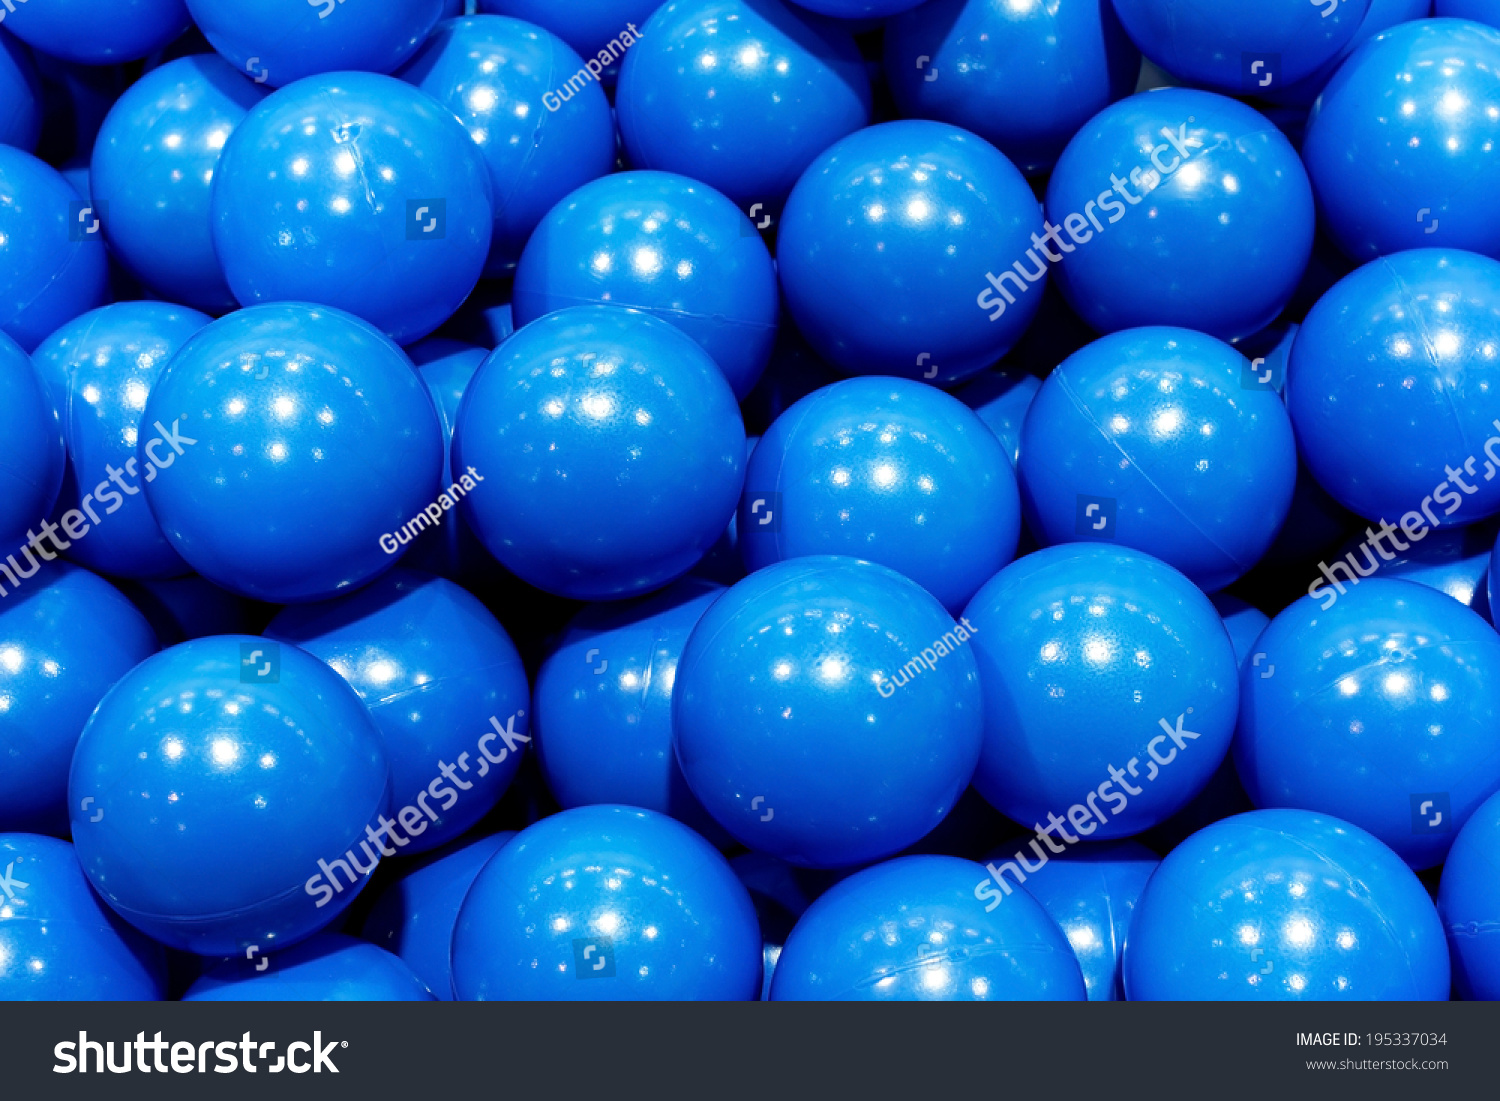 What Are Blue Balls